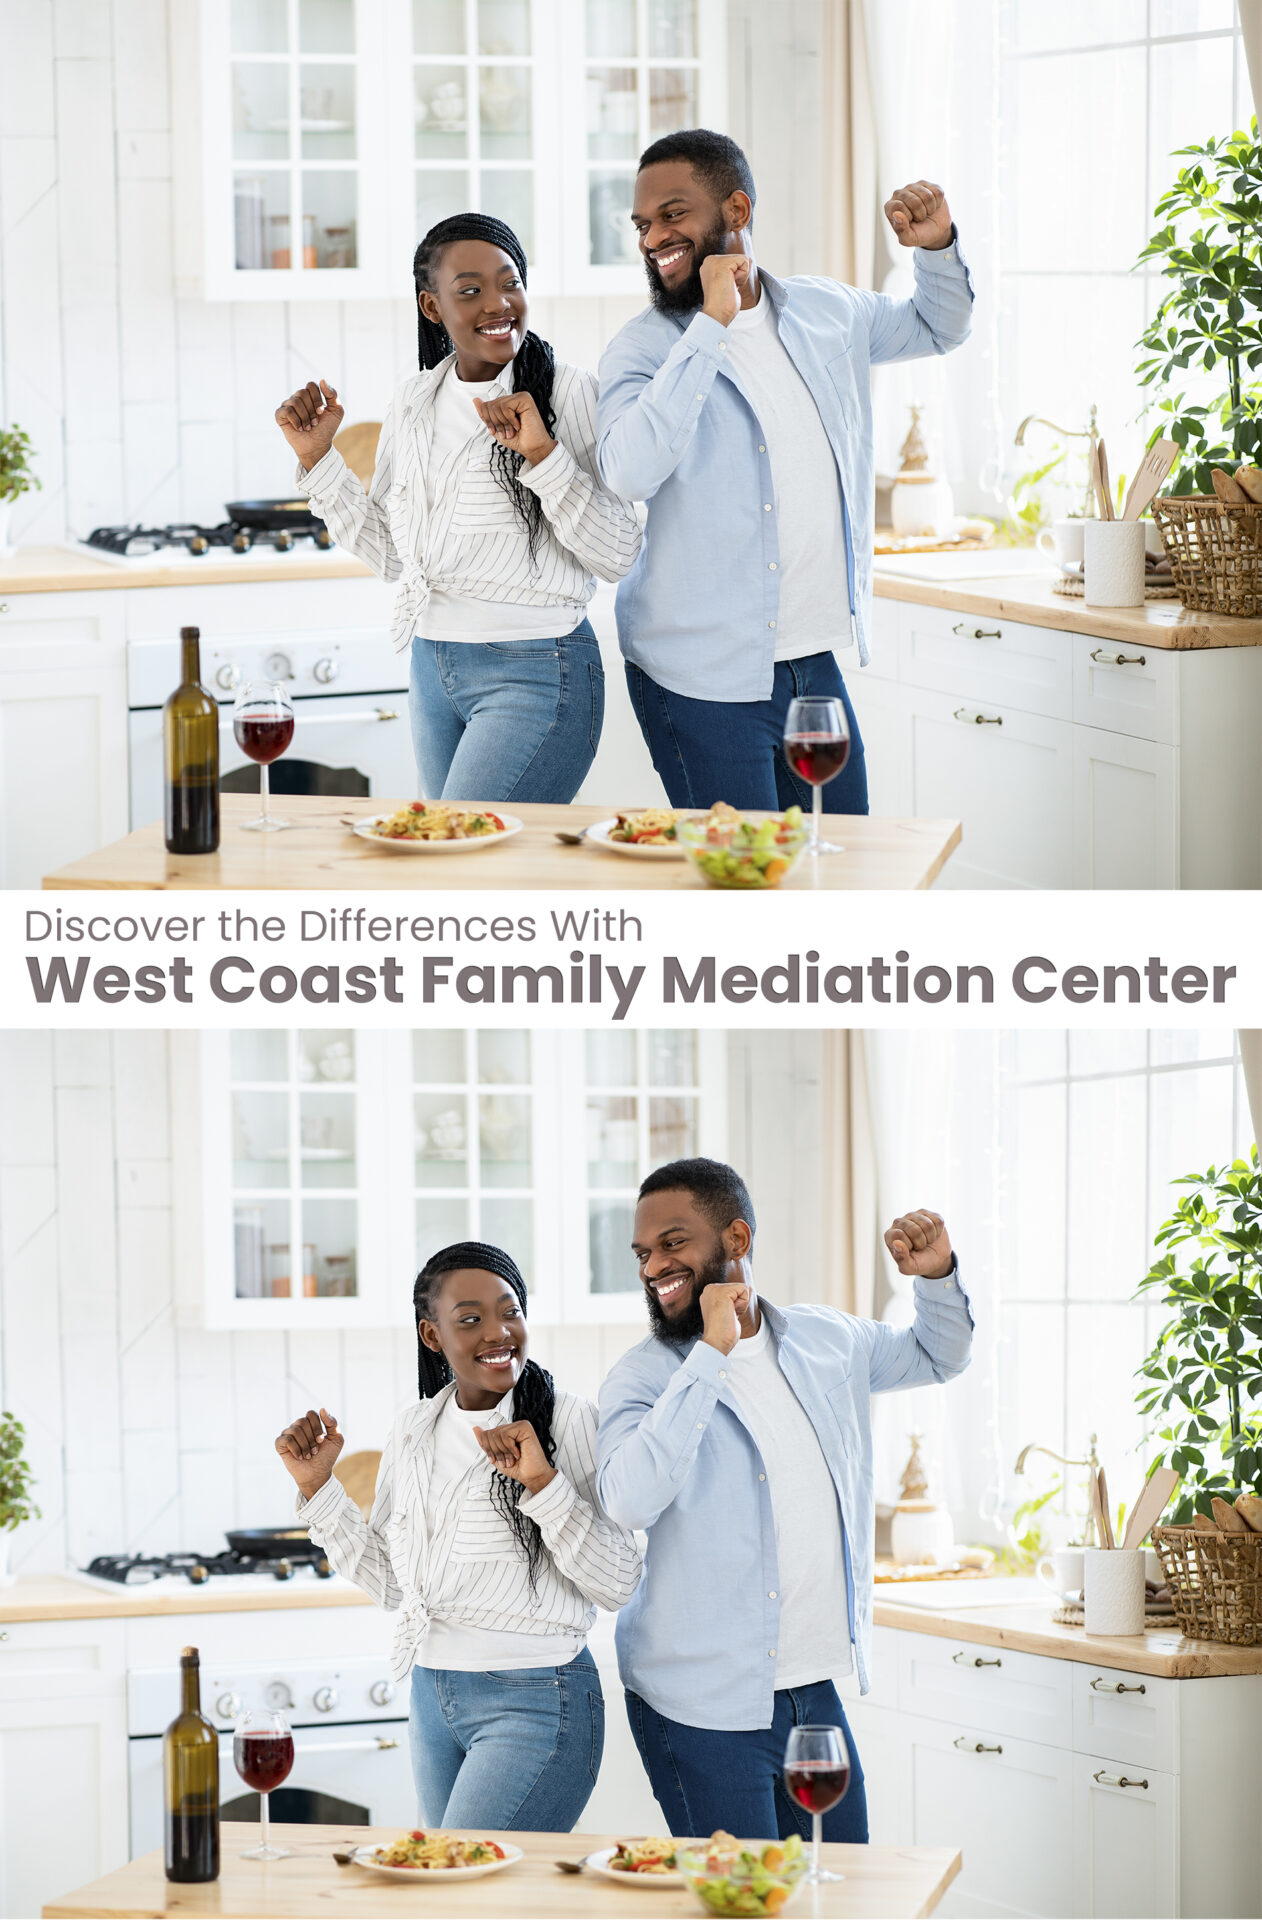 Spot the differences puzzle - Discover the differences with west coast family mediation center|Spot the differences puzzle answer key Discover the differences with west coast family mediation center